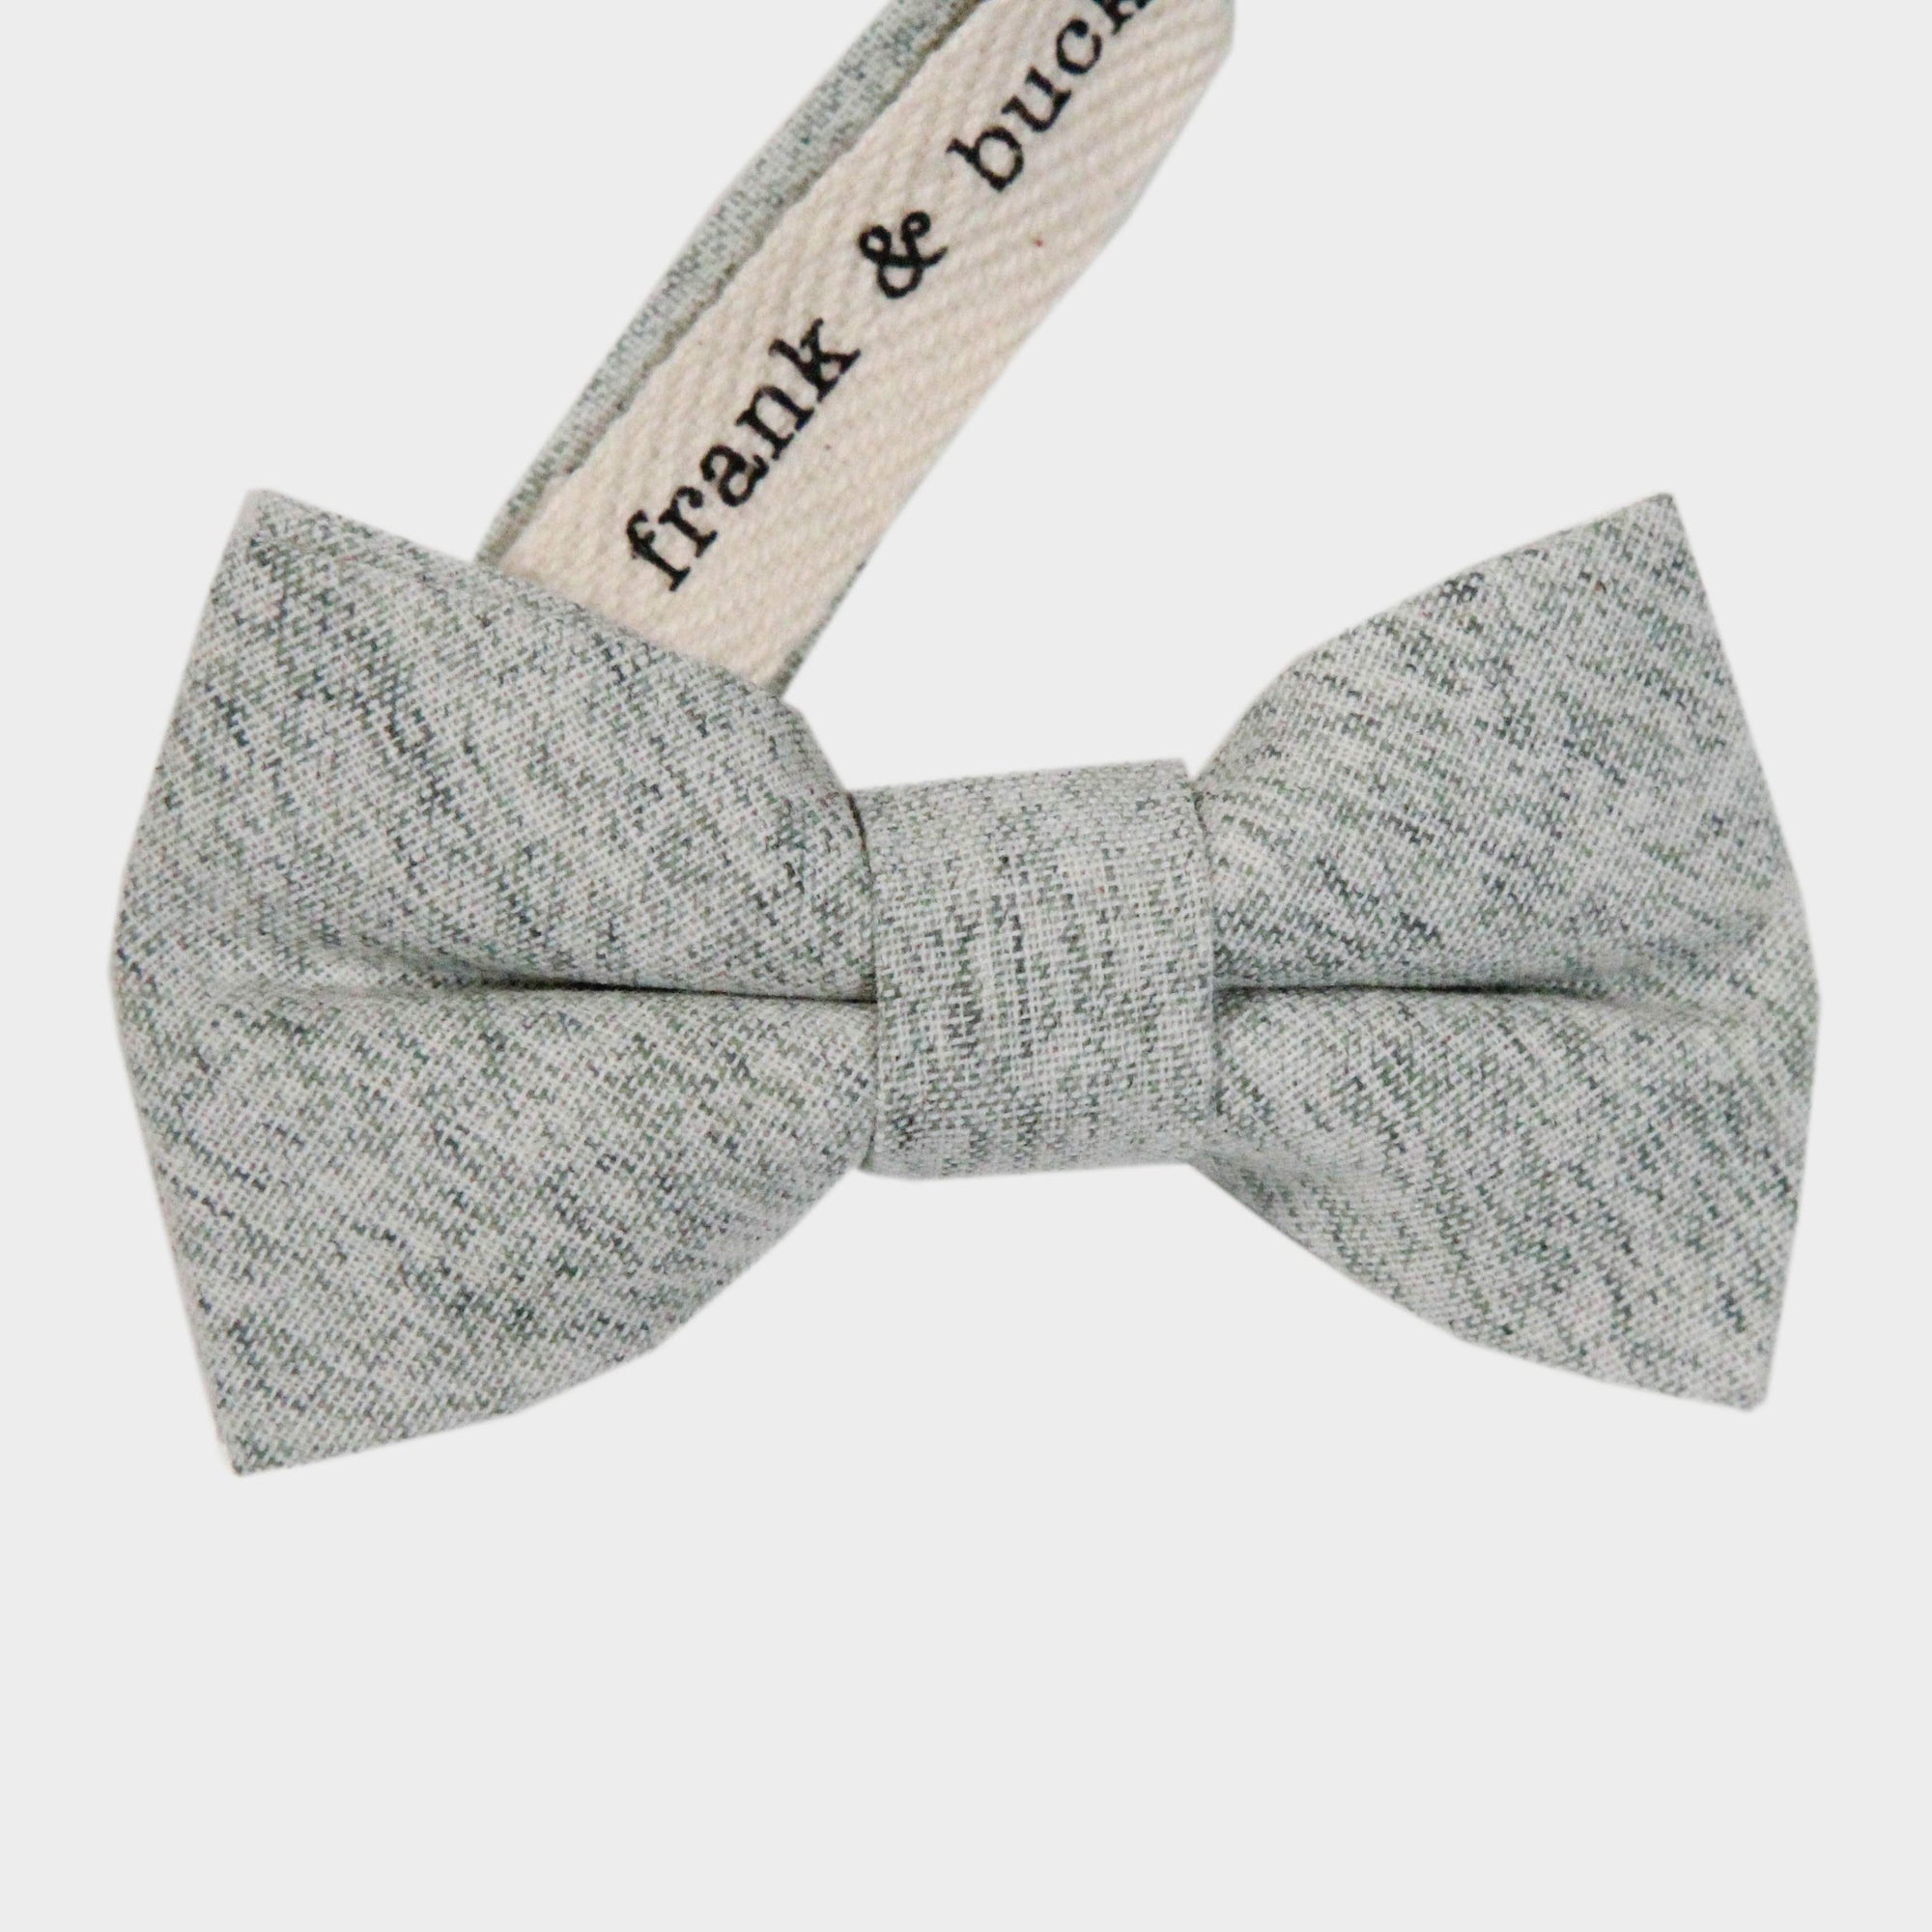 RIVER || SMALL PET BOW TIE - Pet Bow Tie